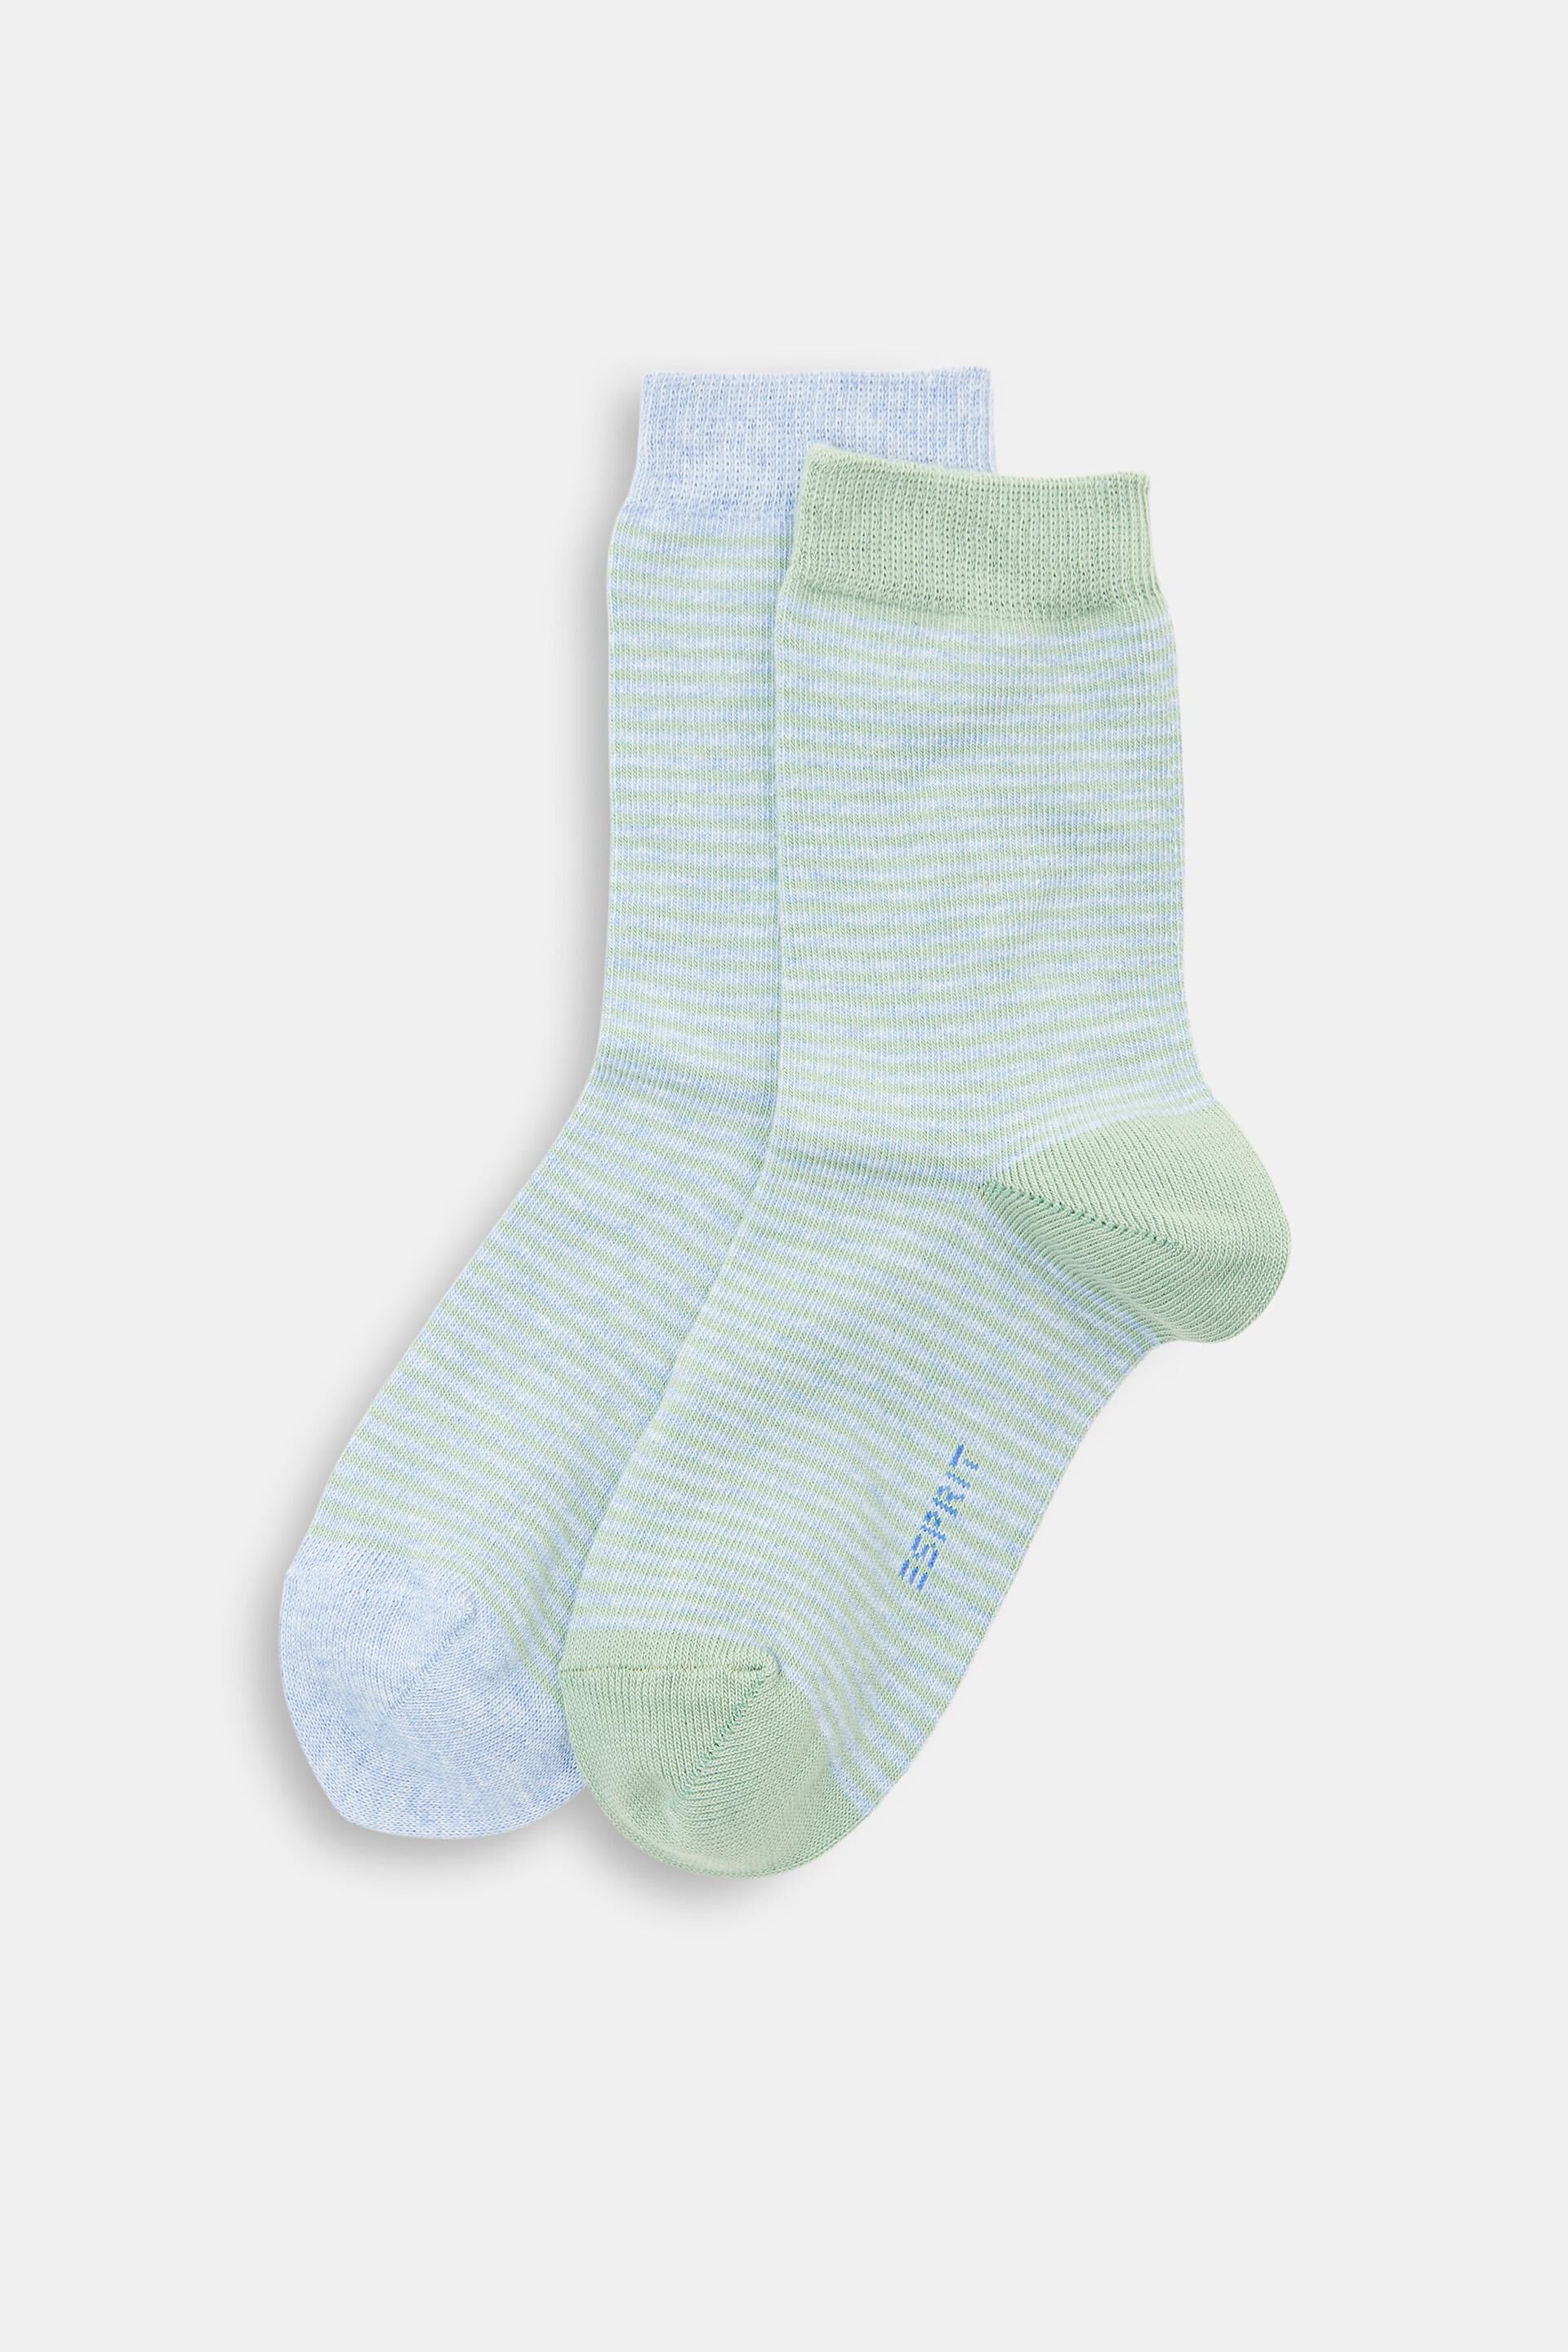 Edc By Esprit Double pack of striped socks, organic cotton